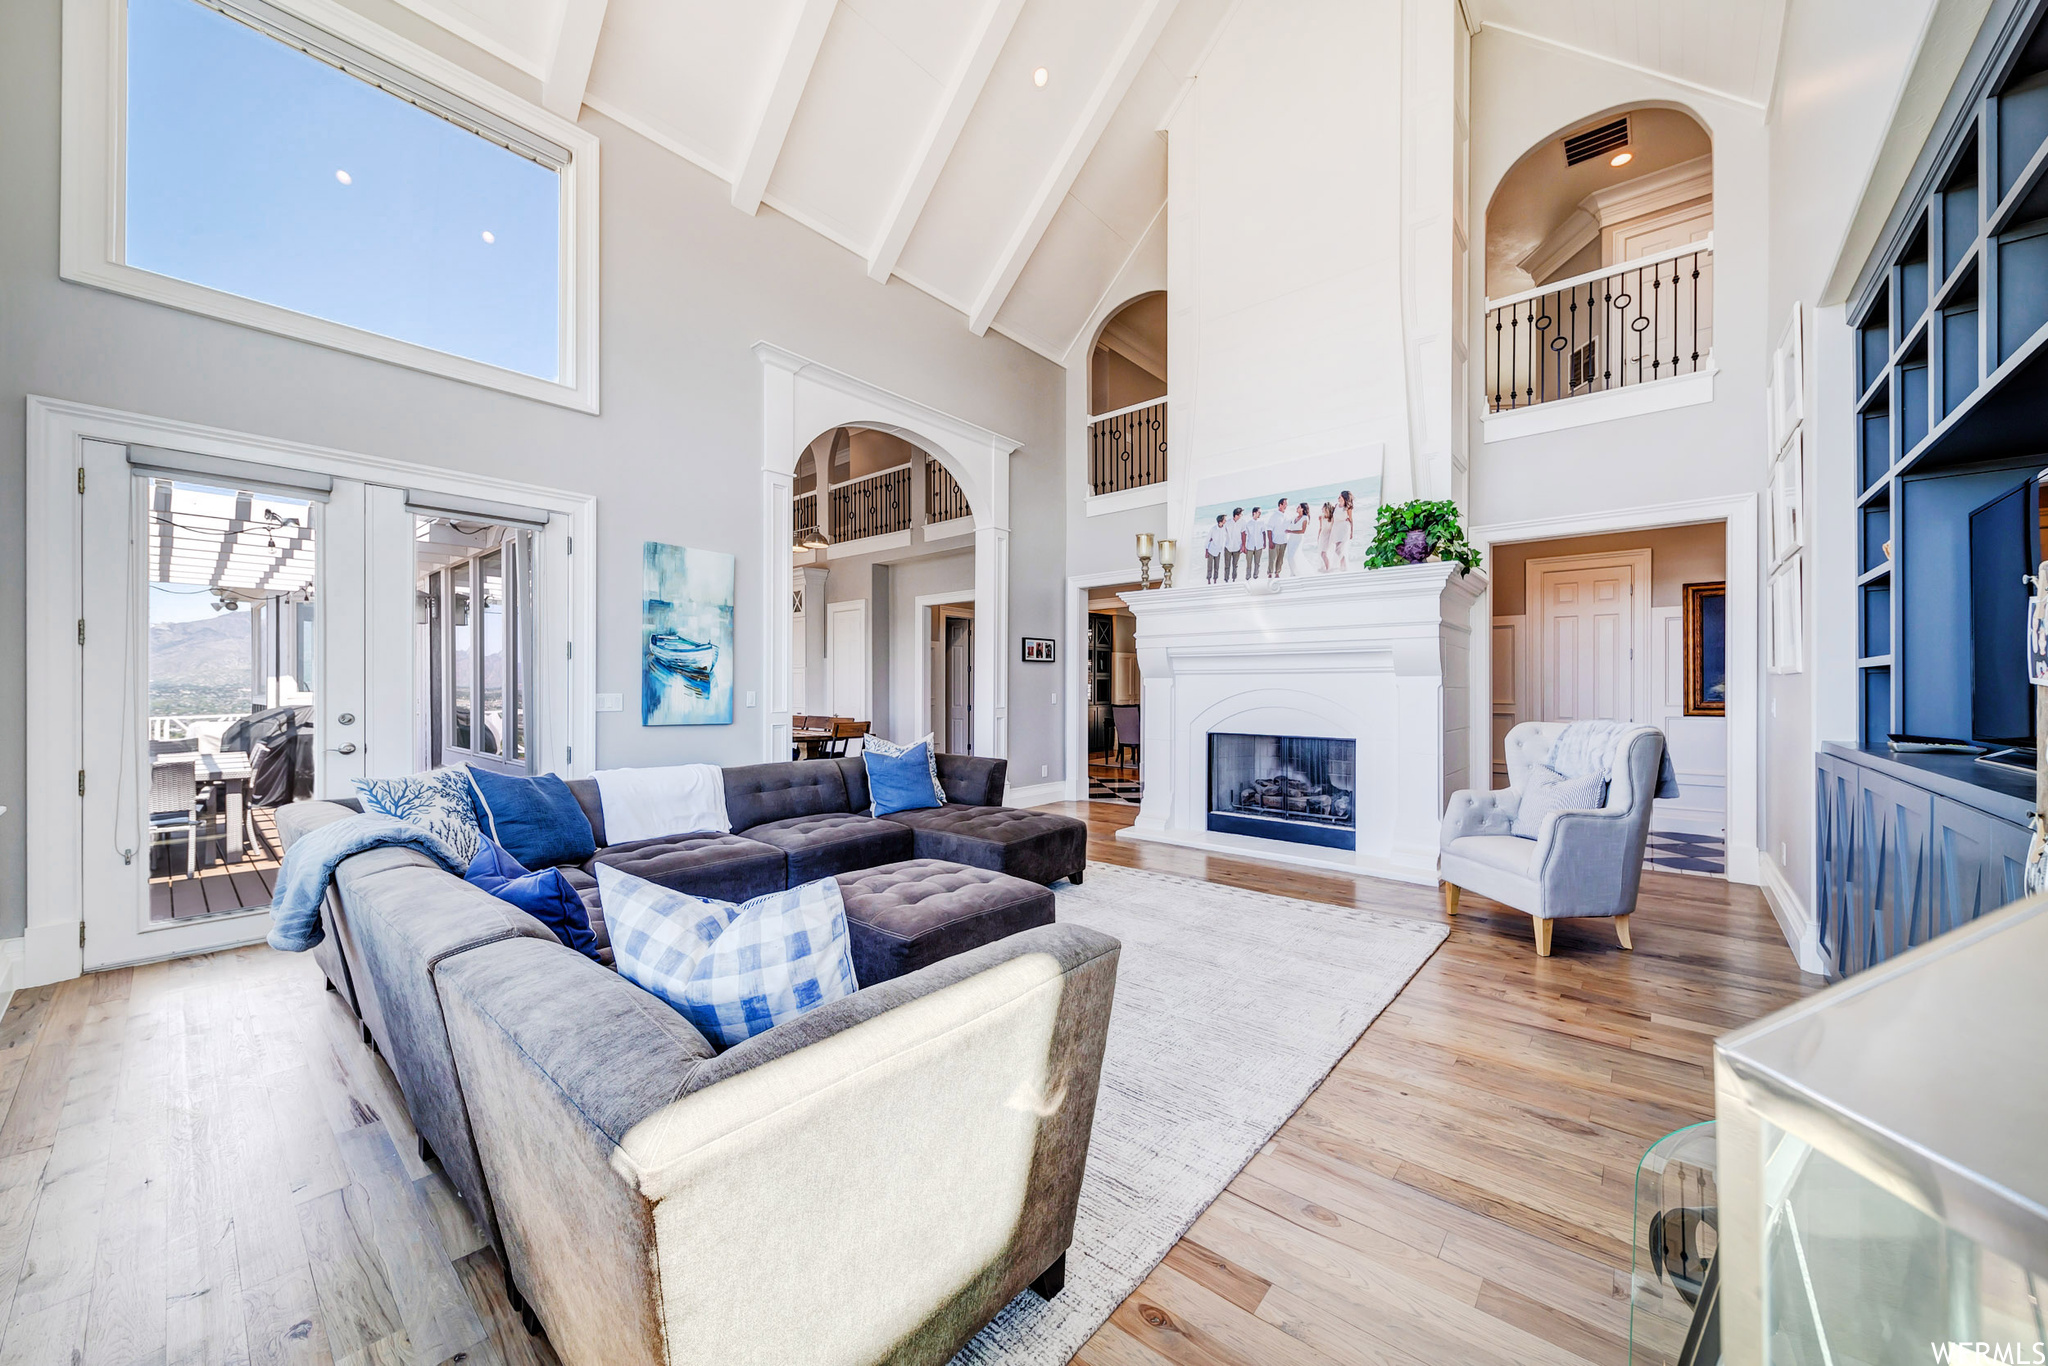 Living room with a high ceiling, light hardwood floors, lofted ceiling, a fireplace and an abundance of natural light that provide the panoramic views of the city and mountains.